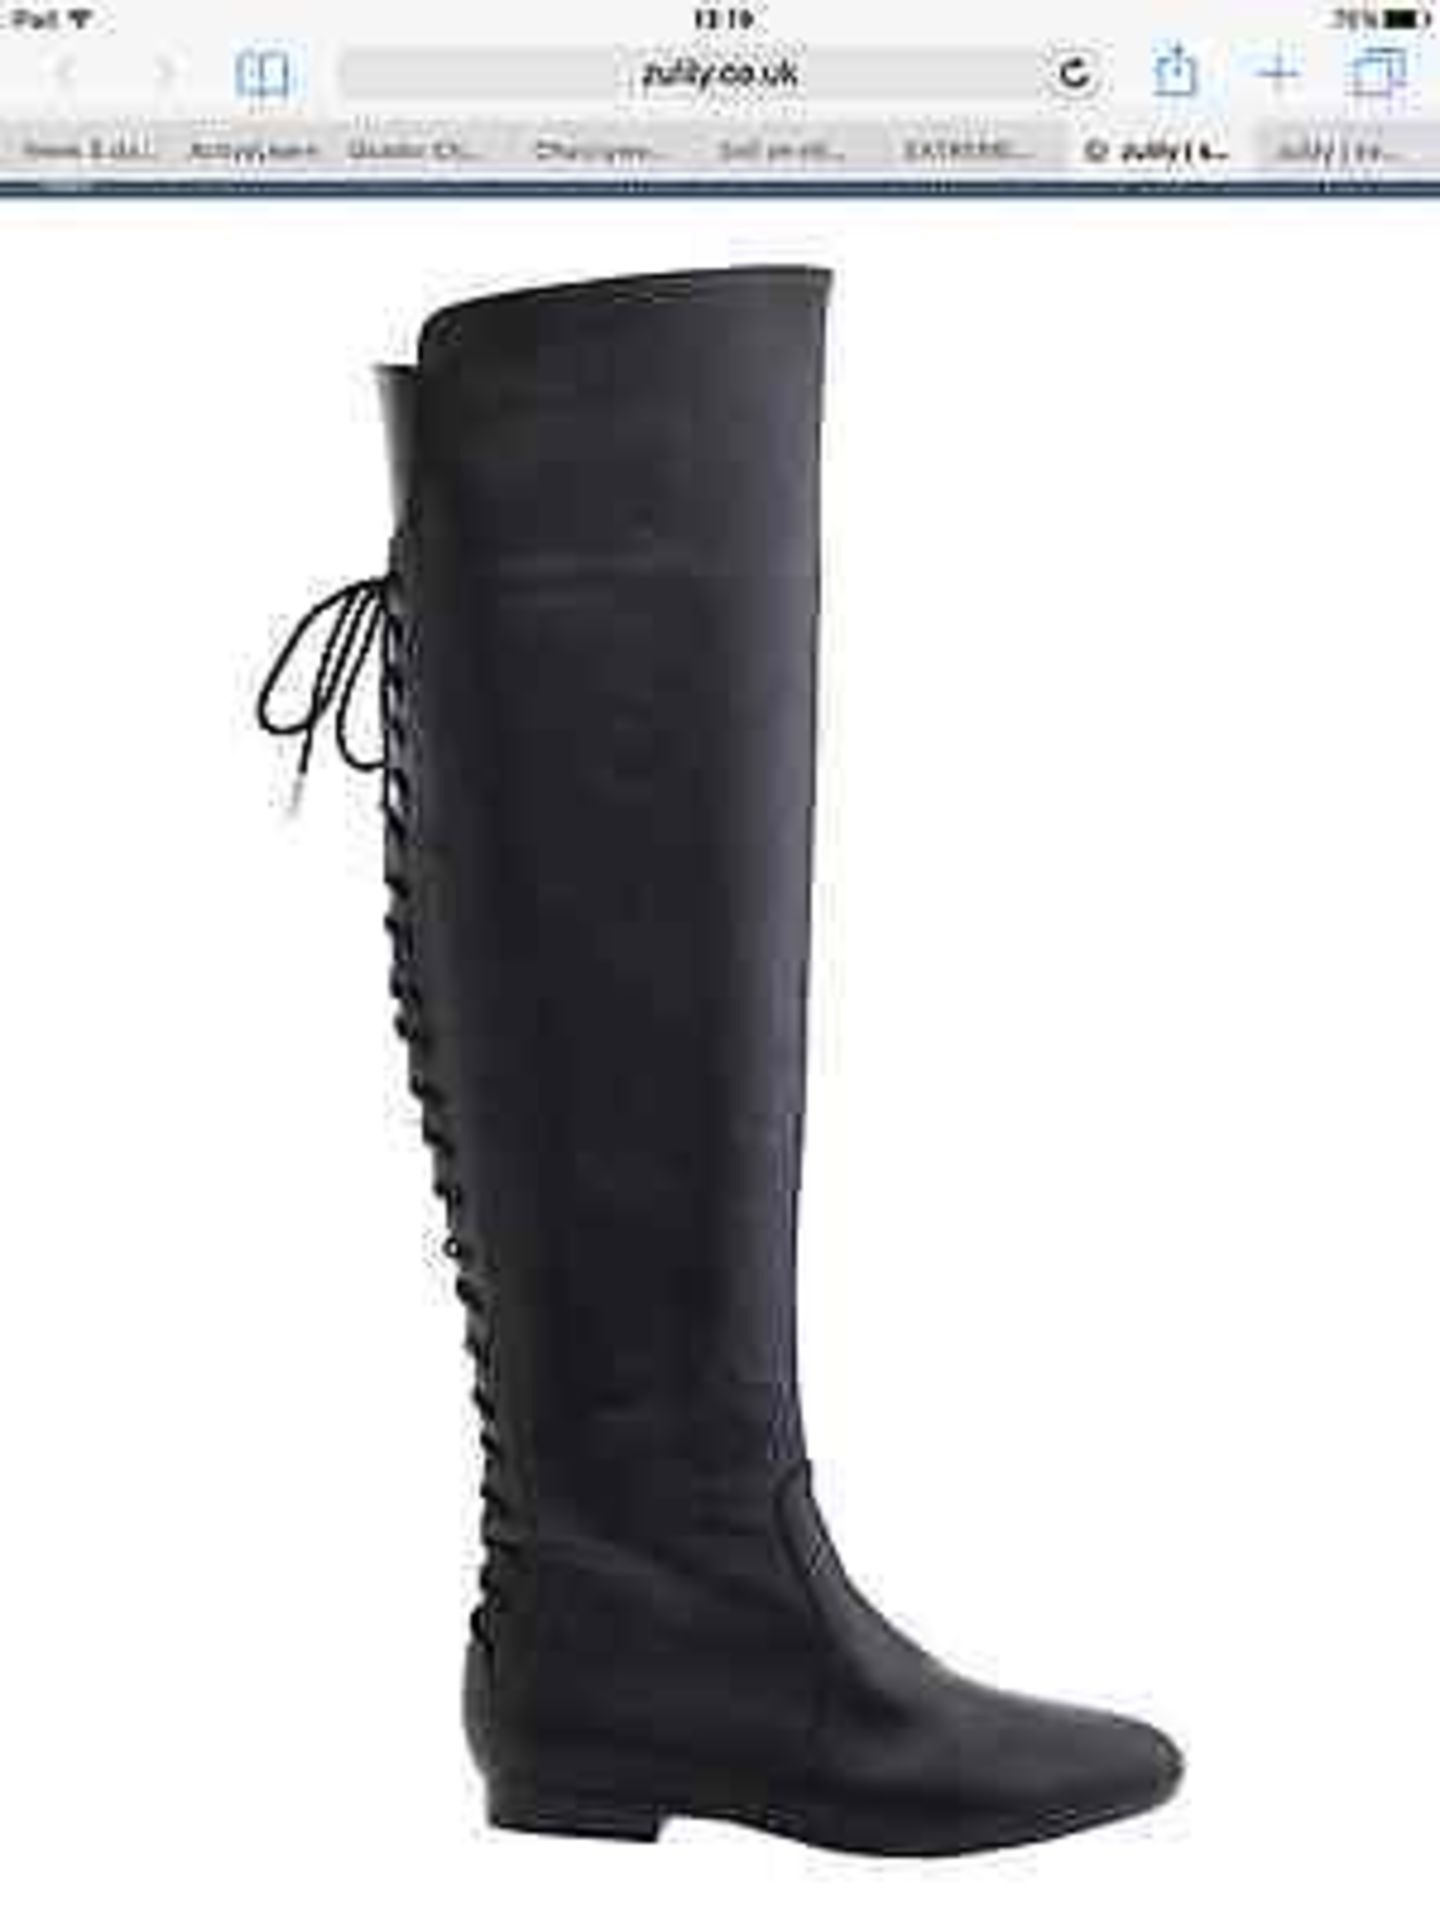 Extreme by Eddie Marc Black Over the Knee Geriatric Boot, Size 6, RRP £127.99 (New with box) - Image 3 of 4